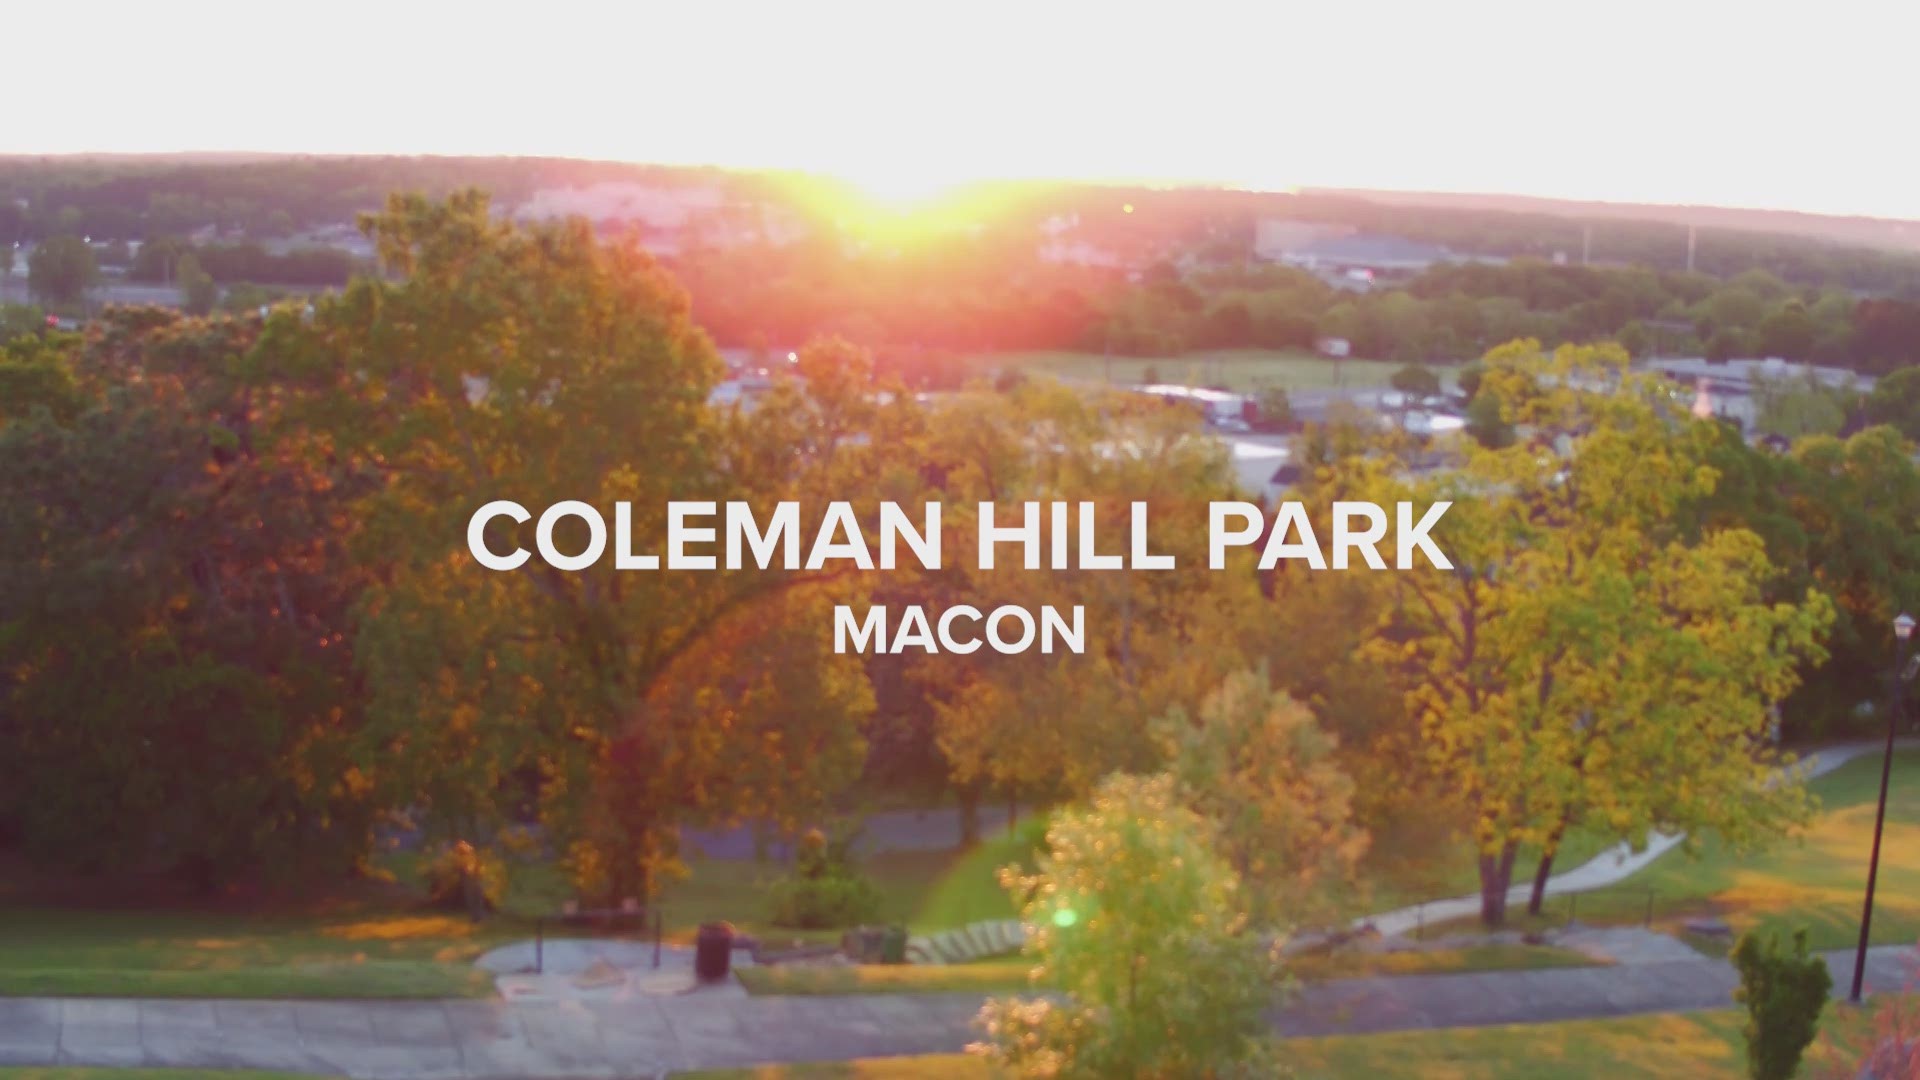 This week's Sunrise Snap location is Coleman Hill Park in Macon. The park sits next to some of Macon's most iconic historic homes and pays homage to veterans with its memorials.